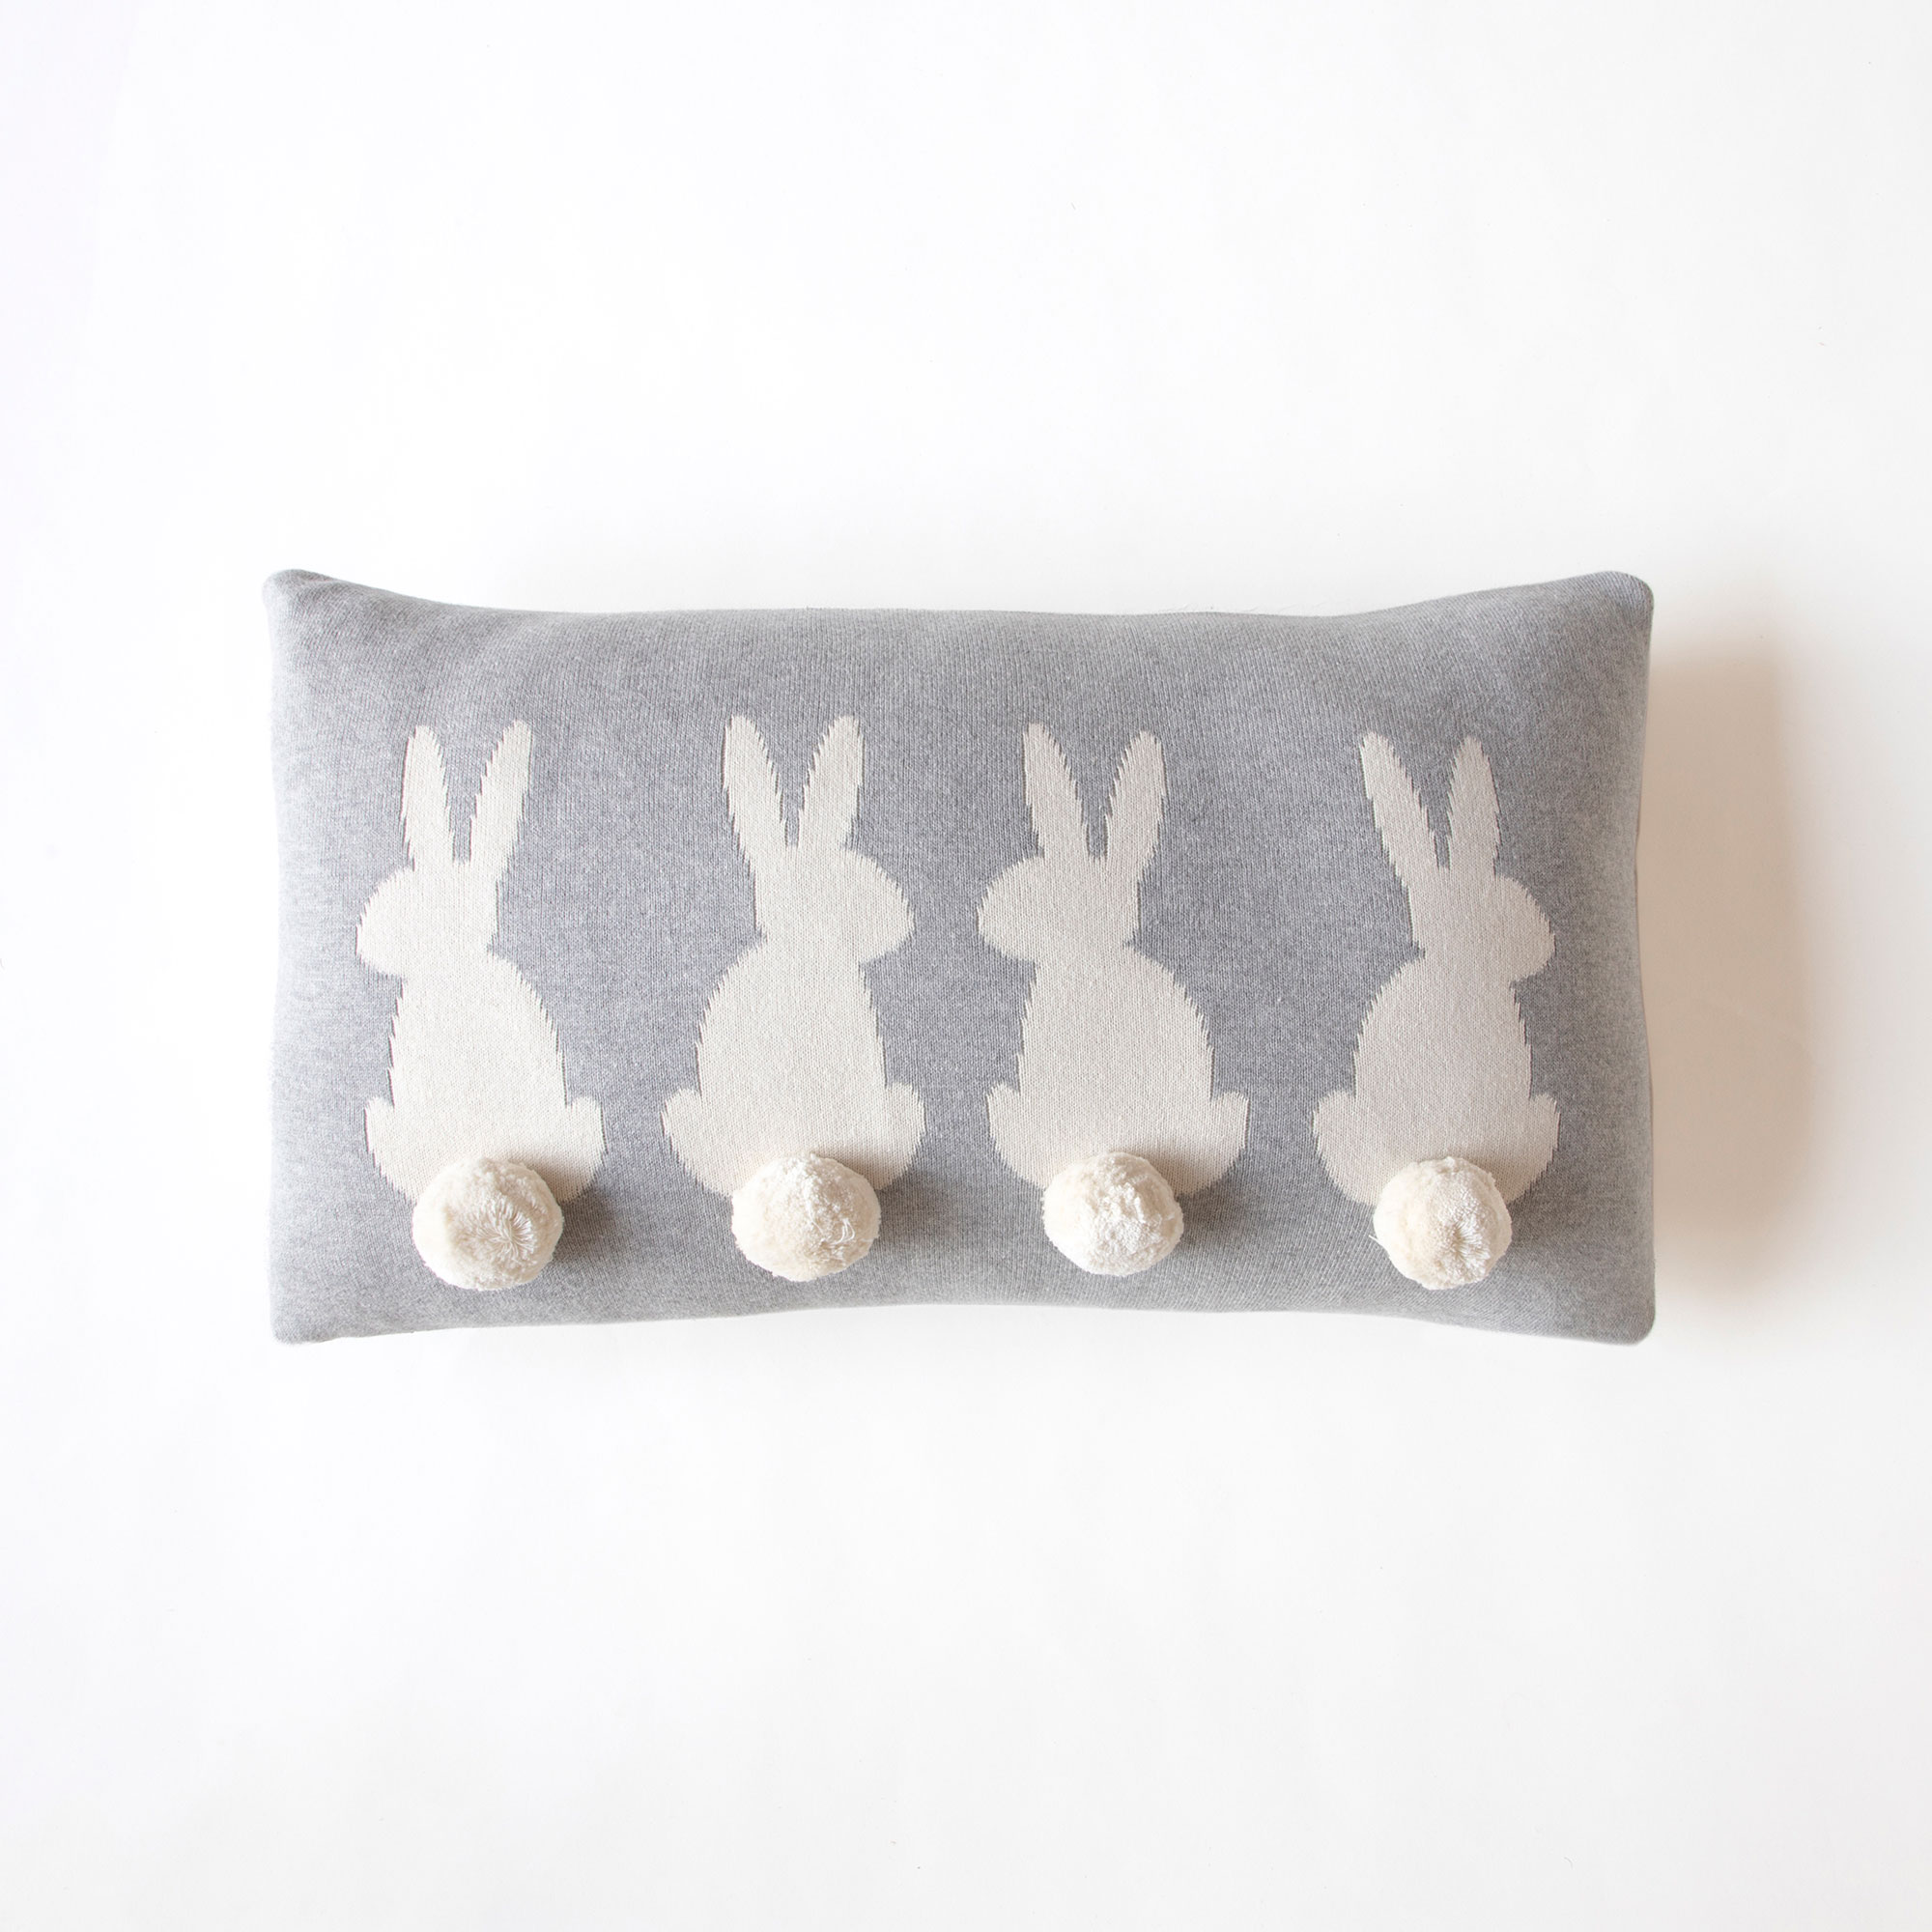 COTTONTAIL CUSHION COVER